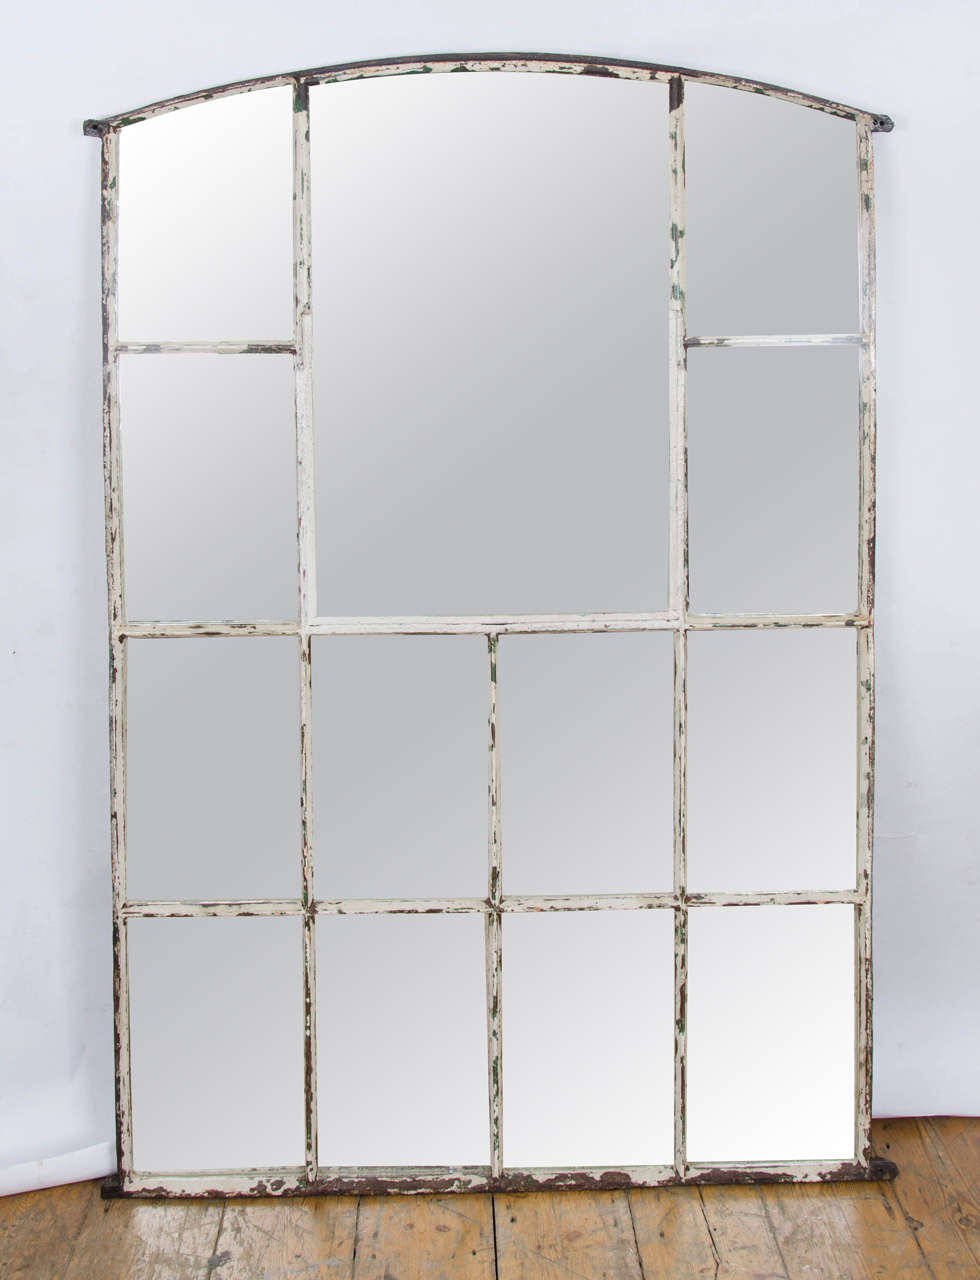 This impressive mirror is made from a reclaimed antique warehouse window mirror that was removed from a Victorian warehouse in Kentish Town, north London. The cast iron frame has a charming weathered appearance, with layers of paint adding to the